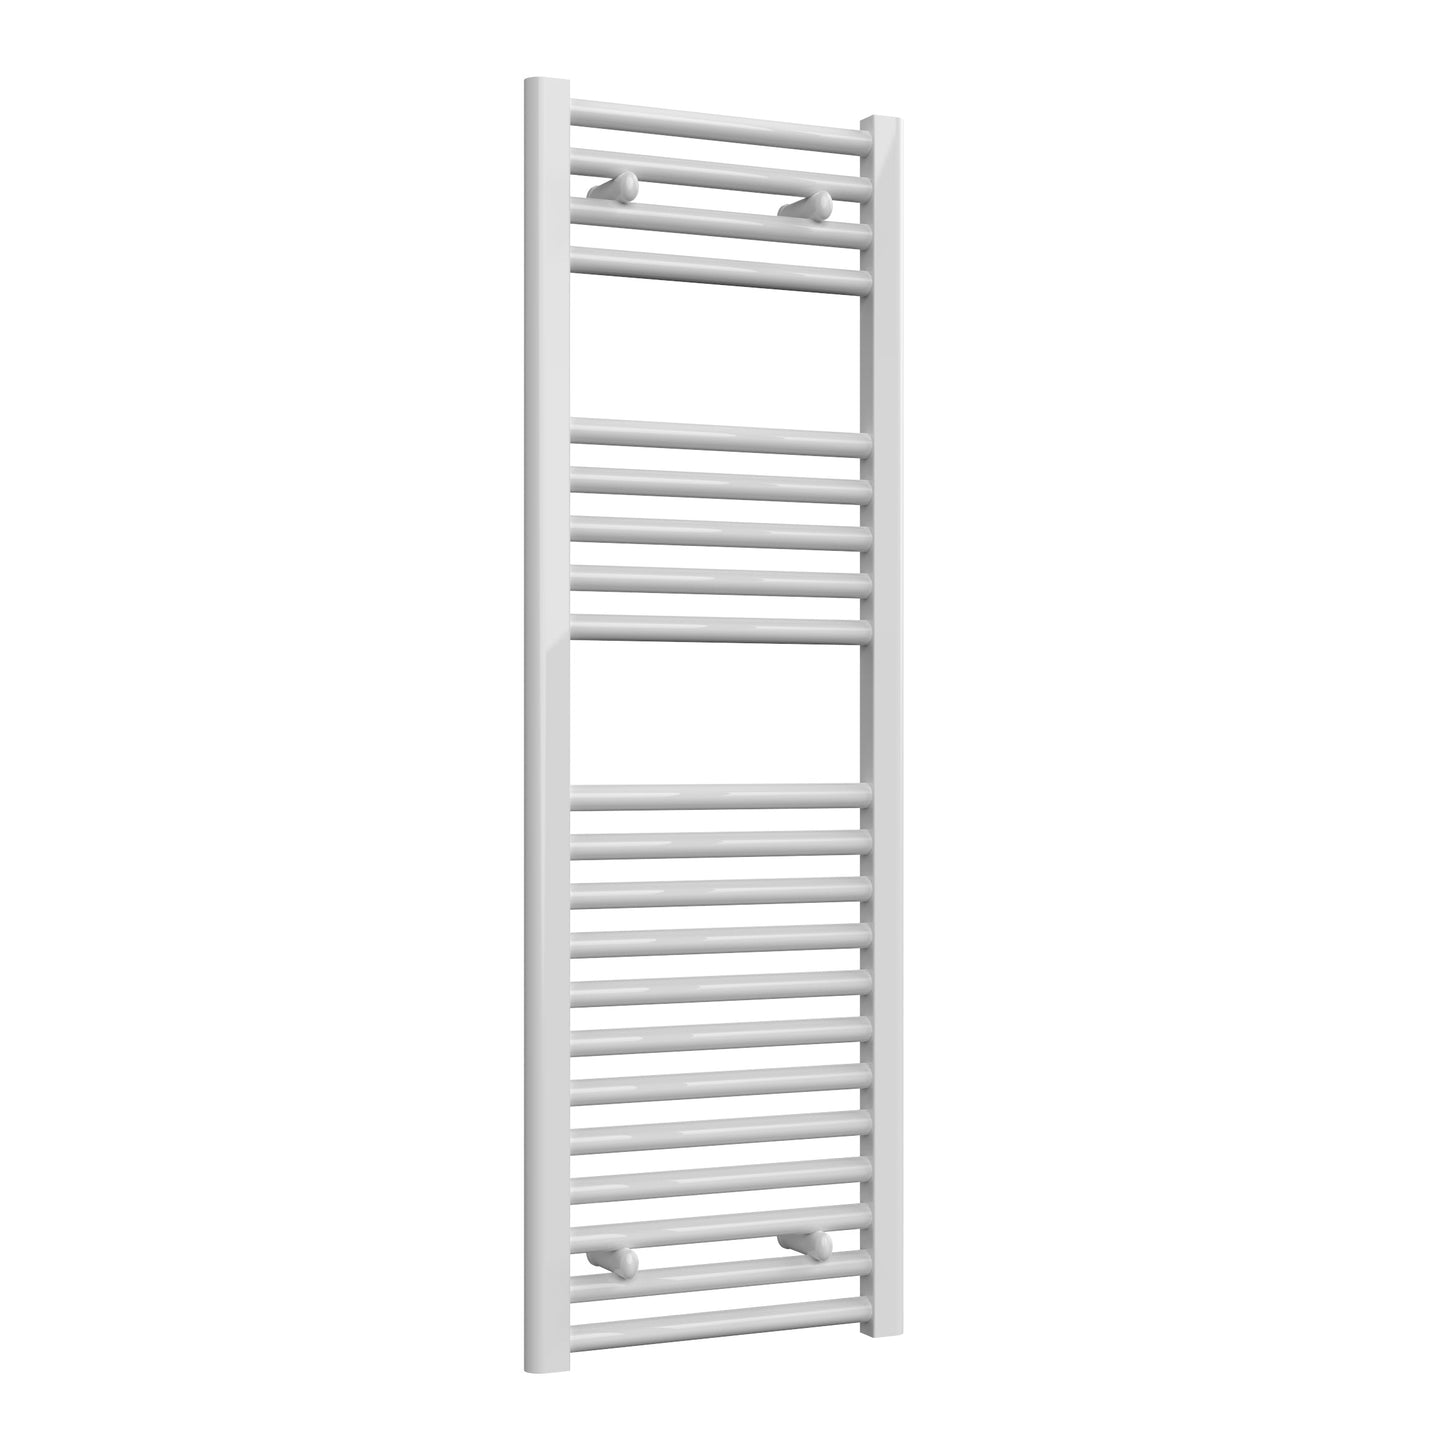 Diva Dual Fuel Curved Heated Towel Rail -Various Sizes - White